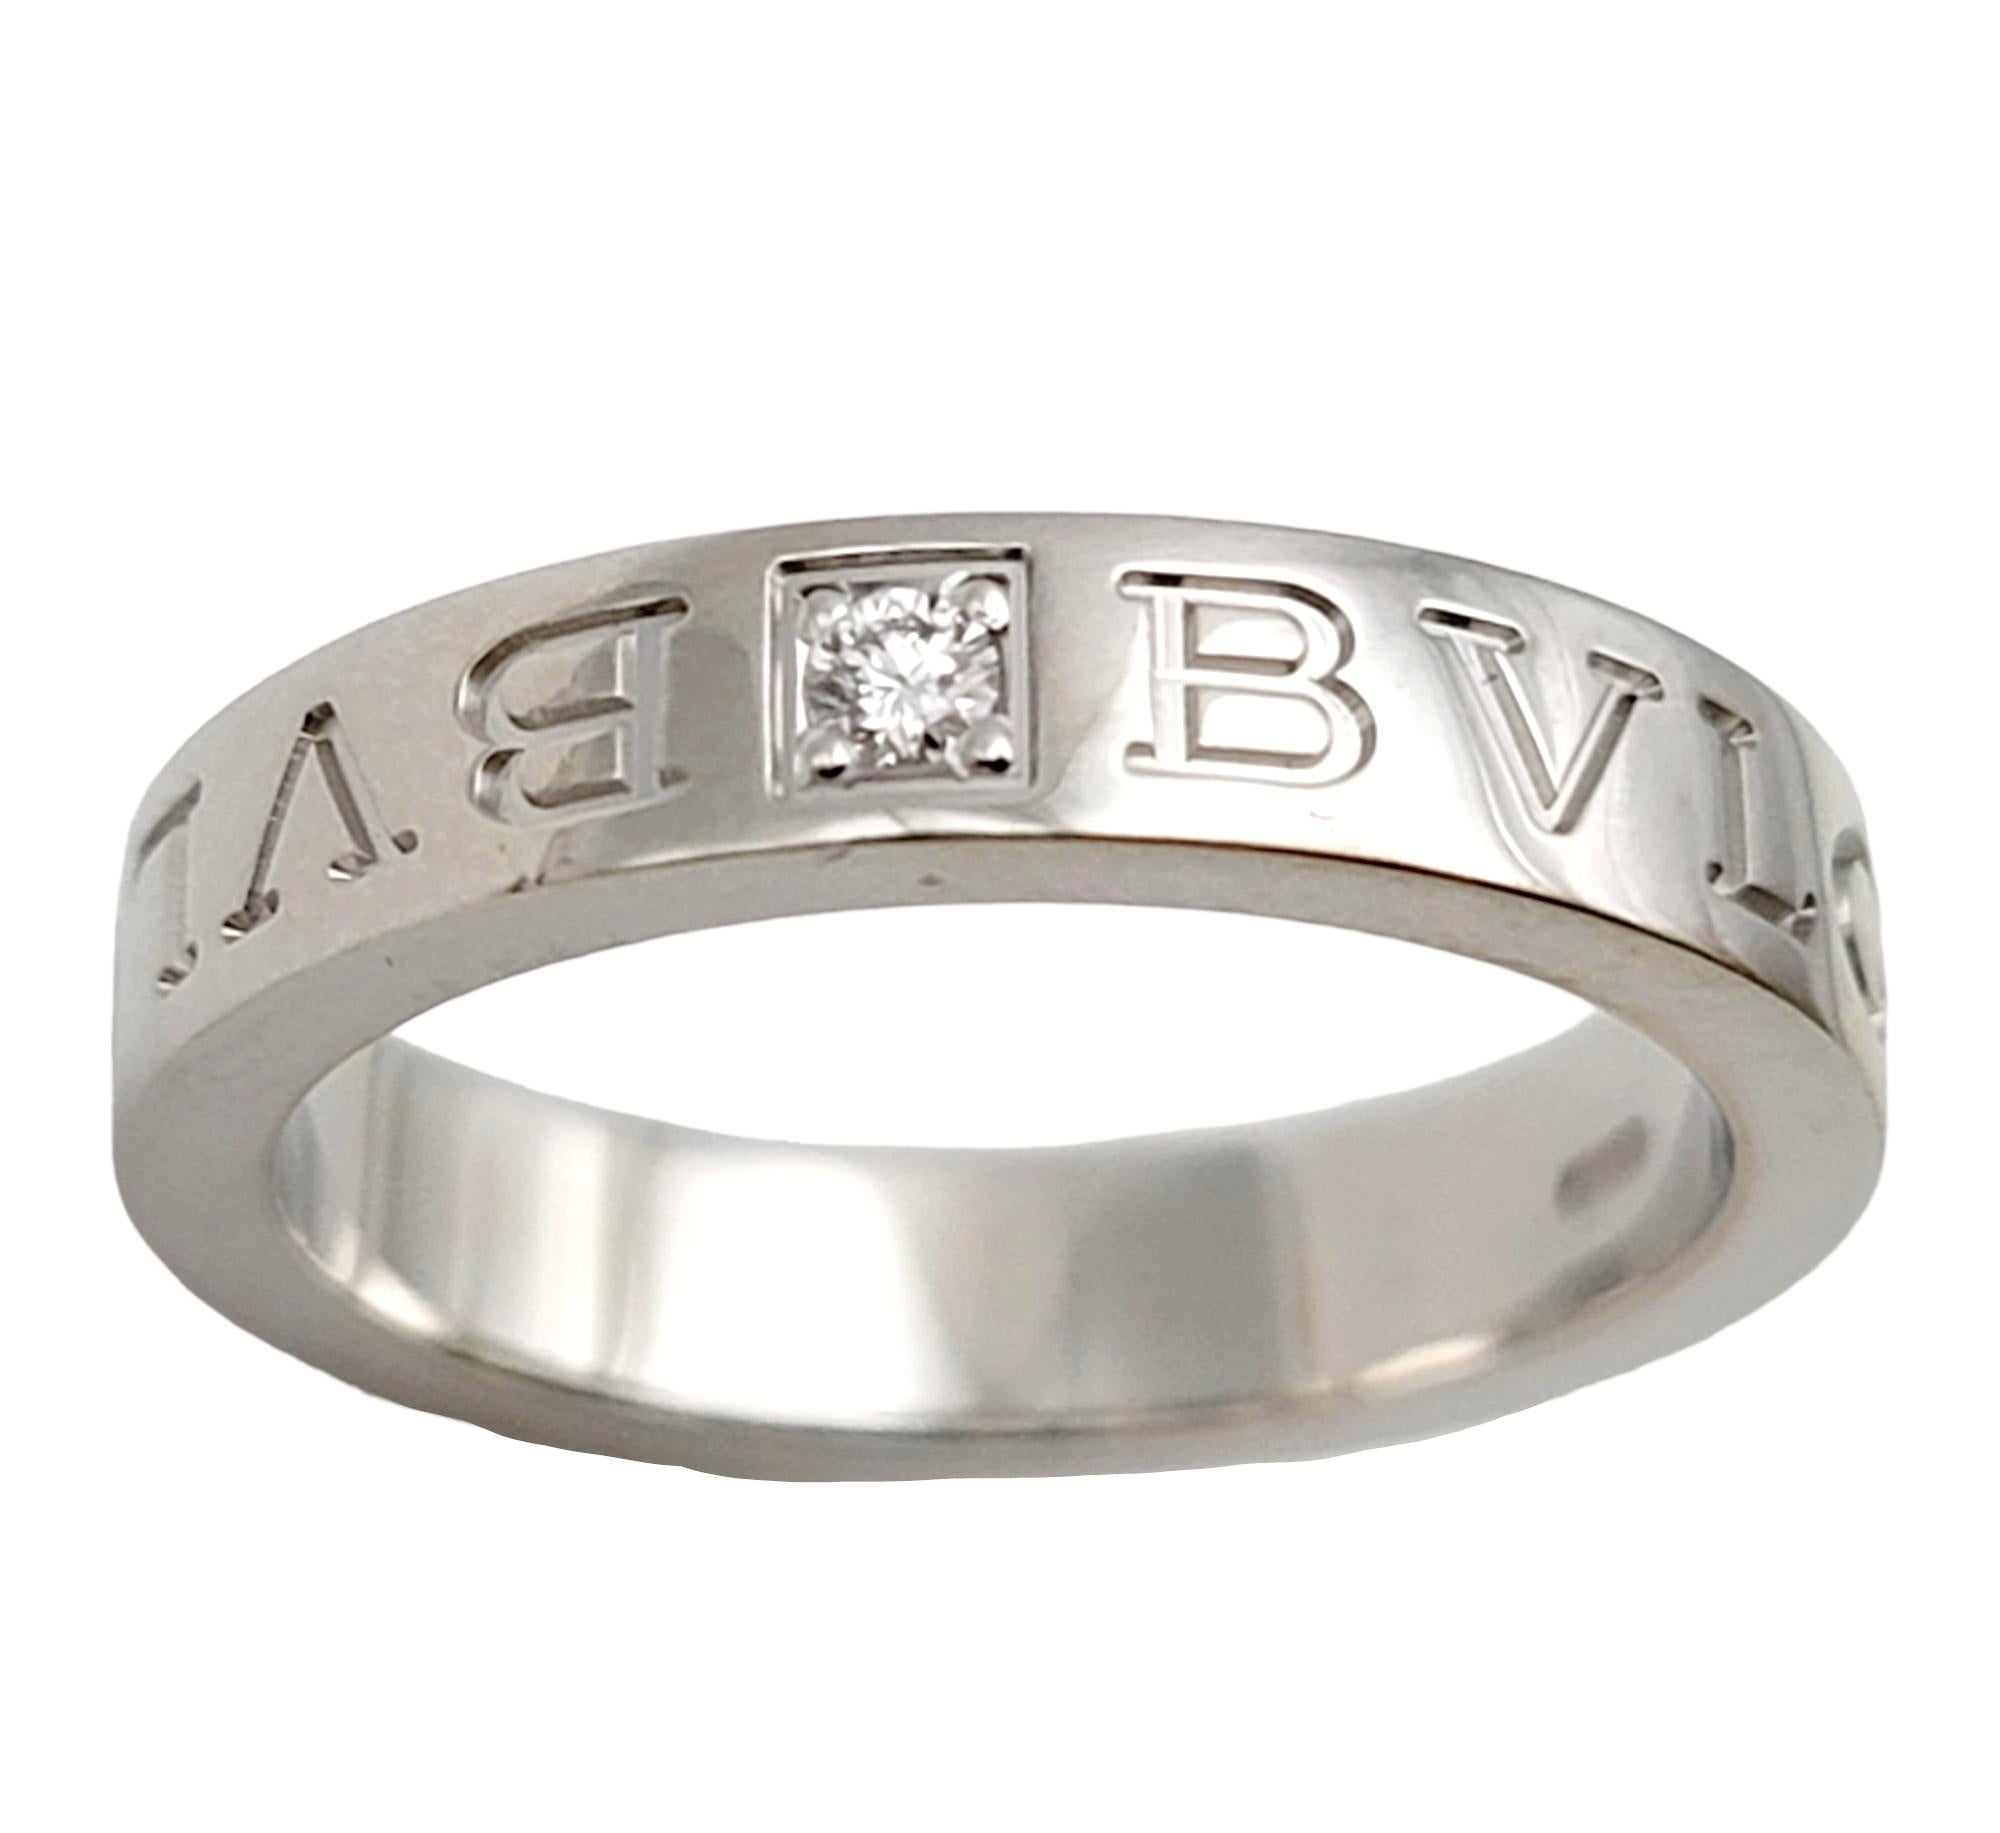 Bulgari Womens Double Logo Wedding Band Ring with Diamond in 18 Karat White Gold In Excellent Condition For Sale In Scottsdale, AZ